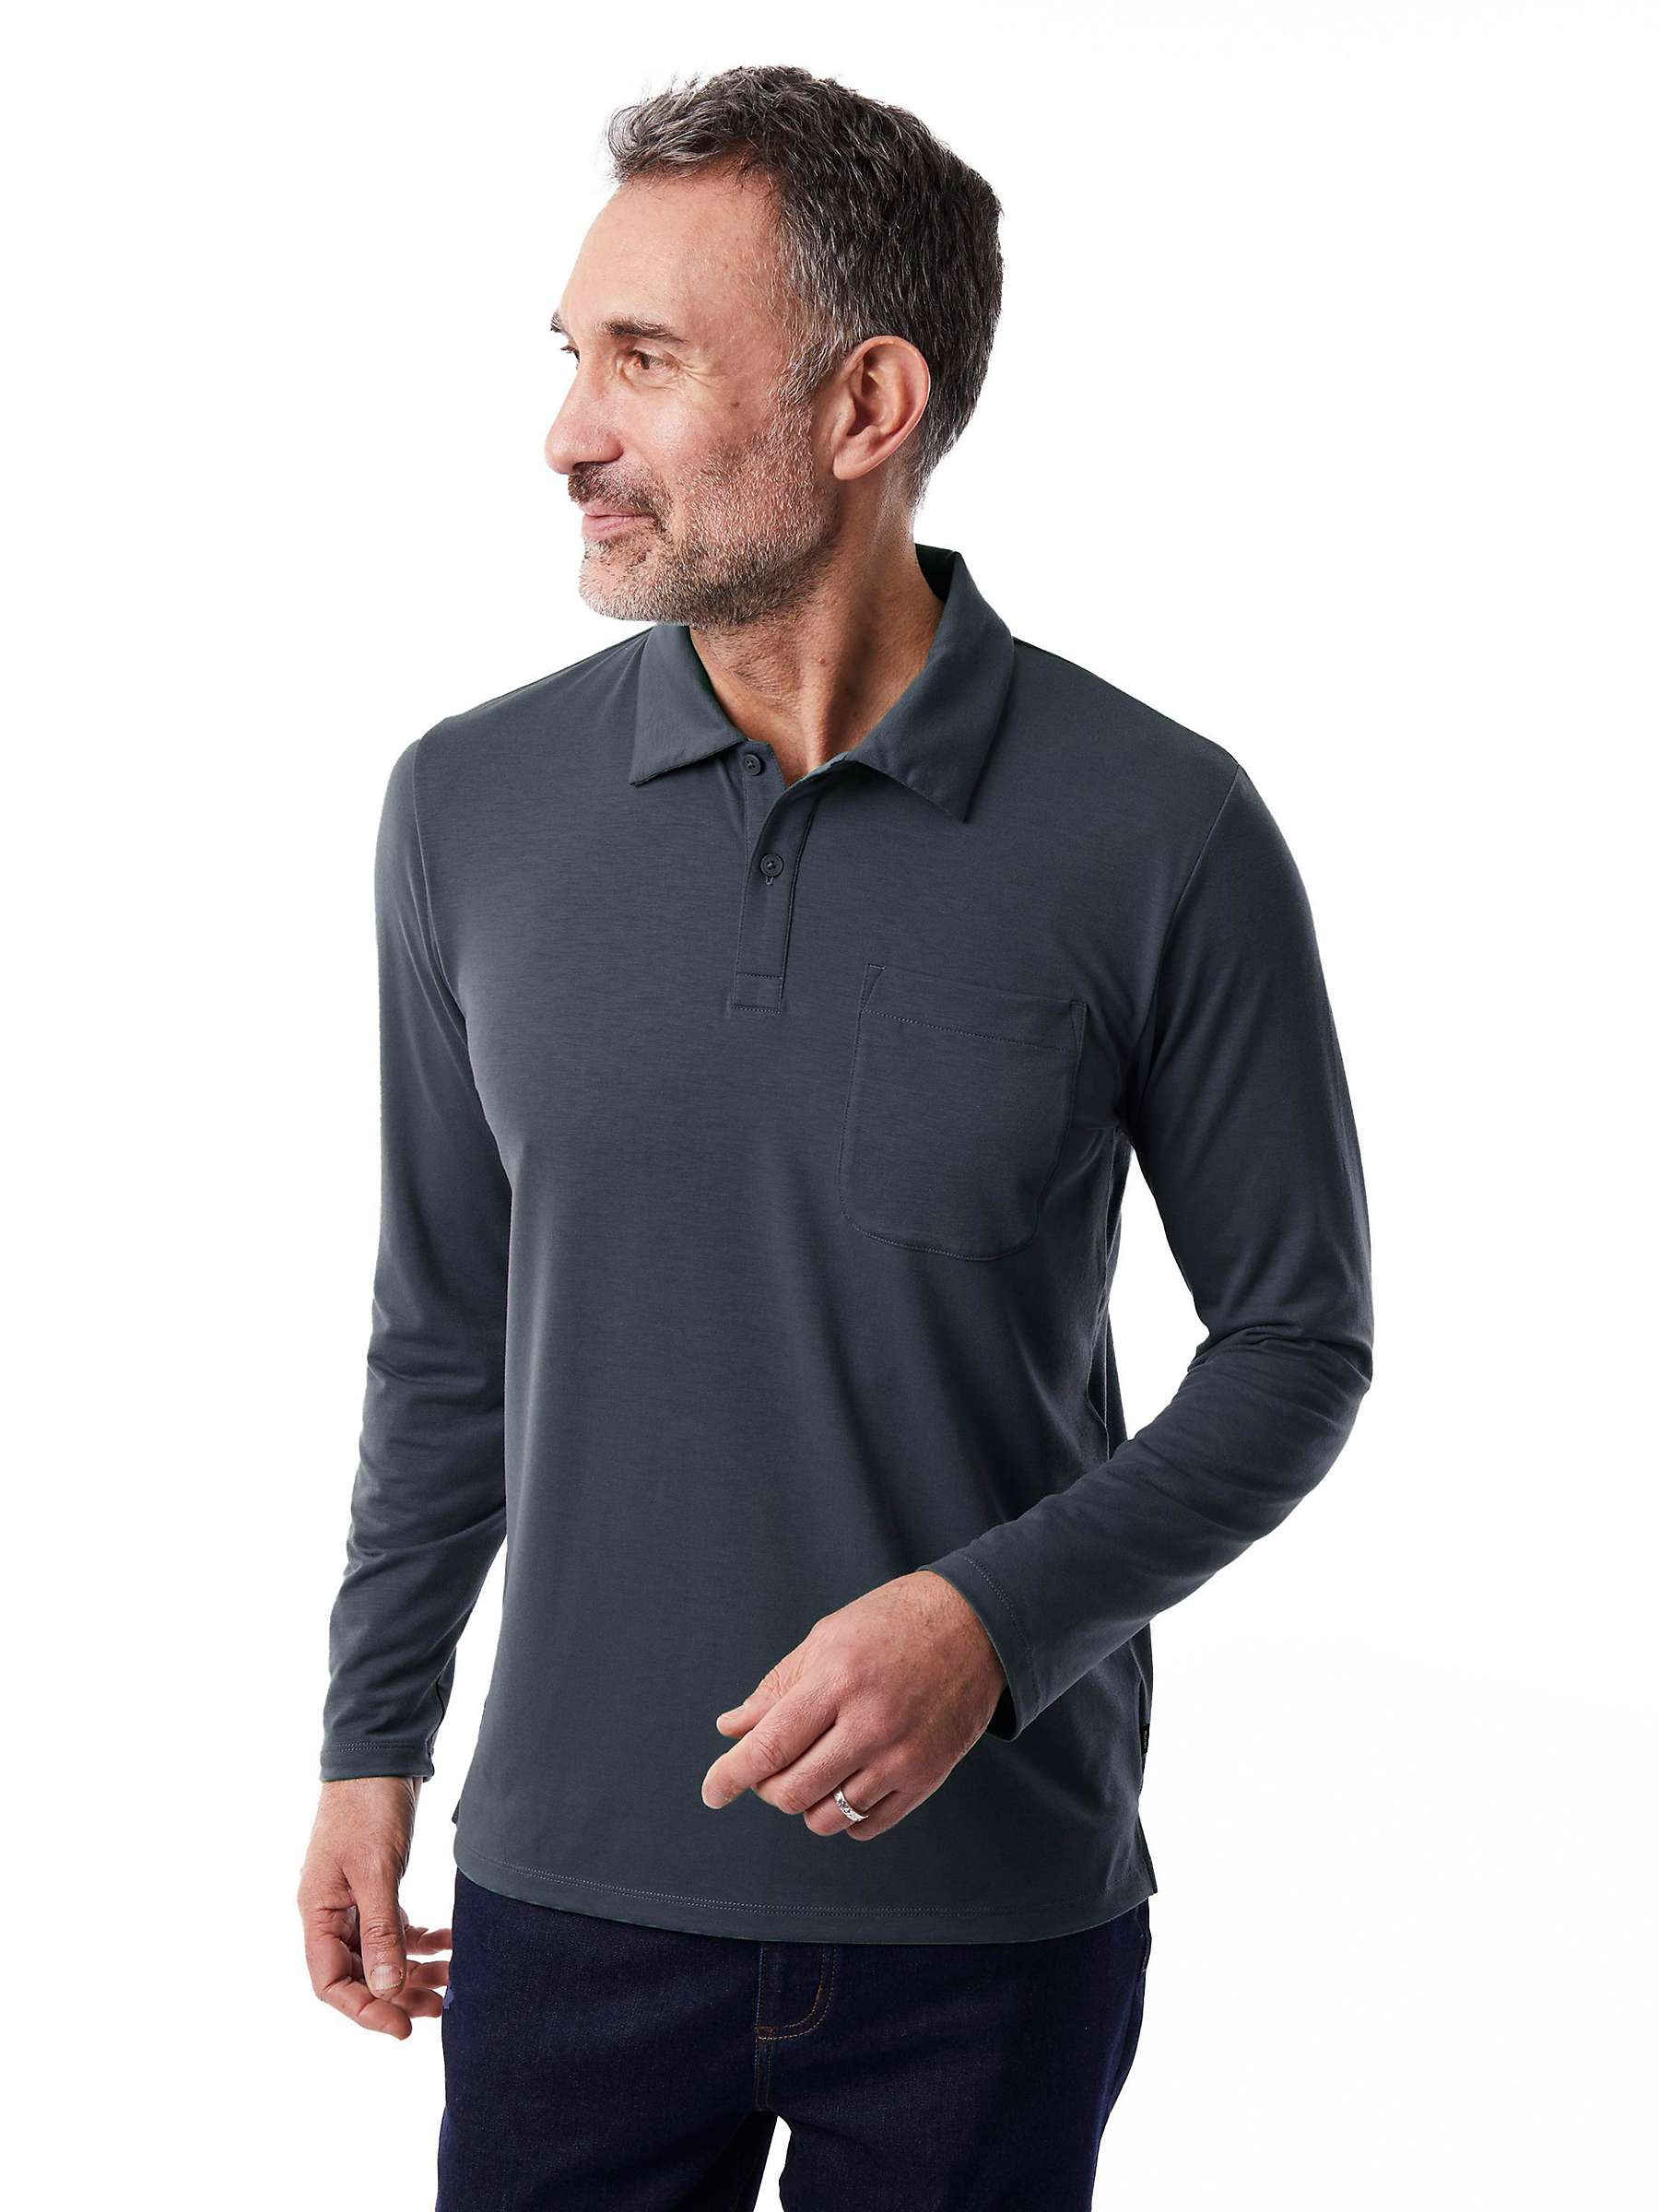 Buy Rohan Global Long Sleeve Polo Top Online at johnlewis.com